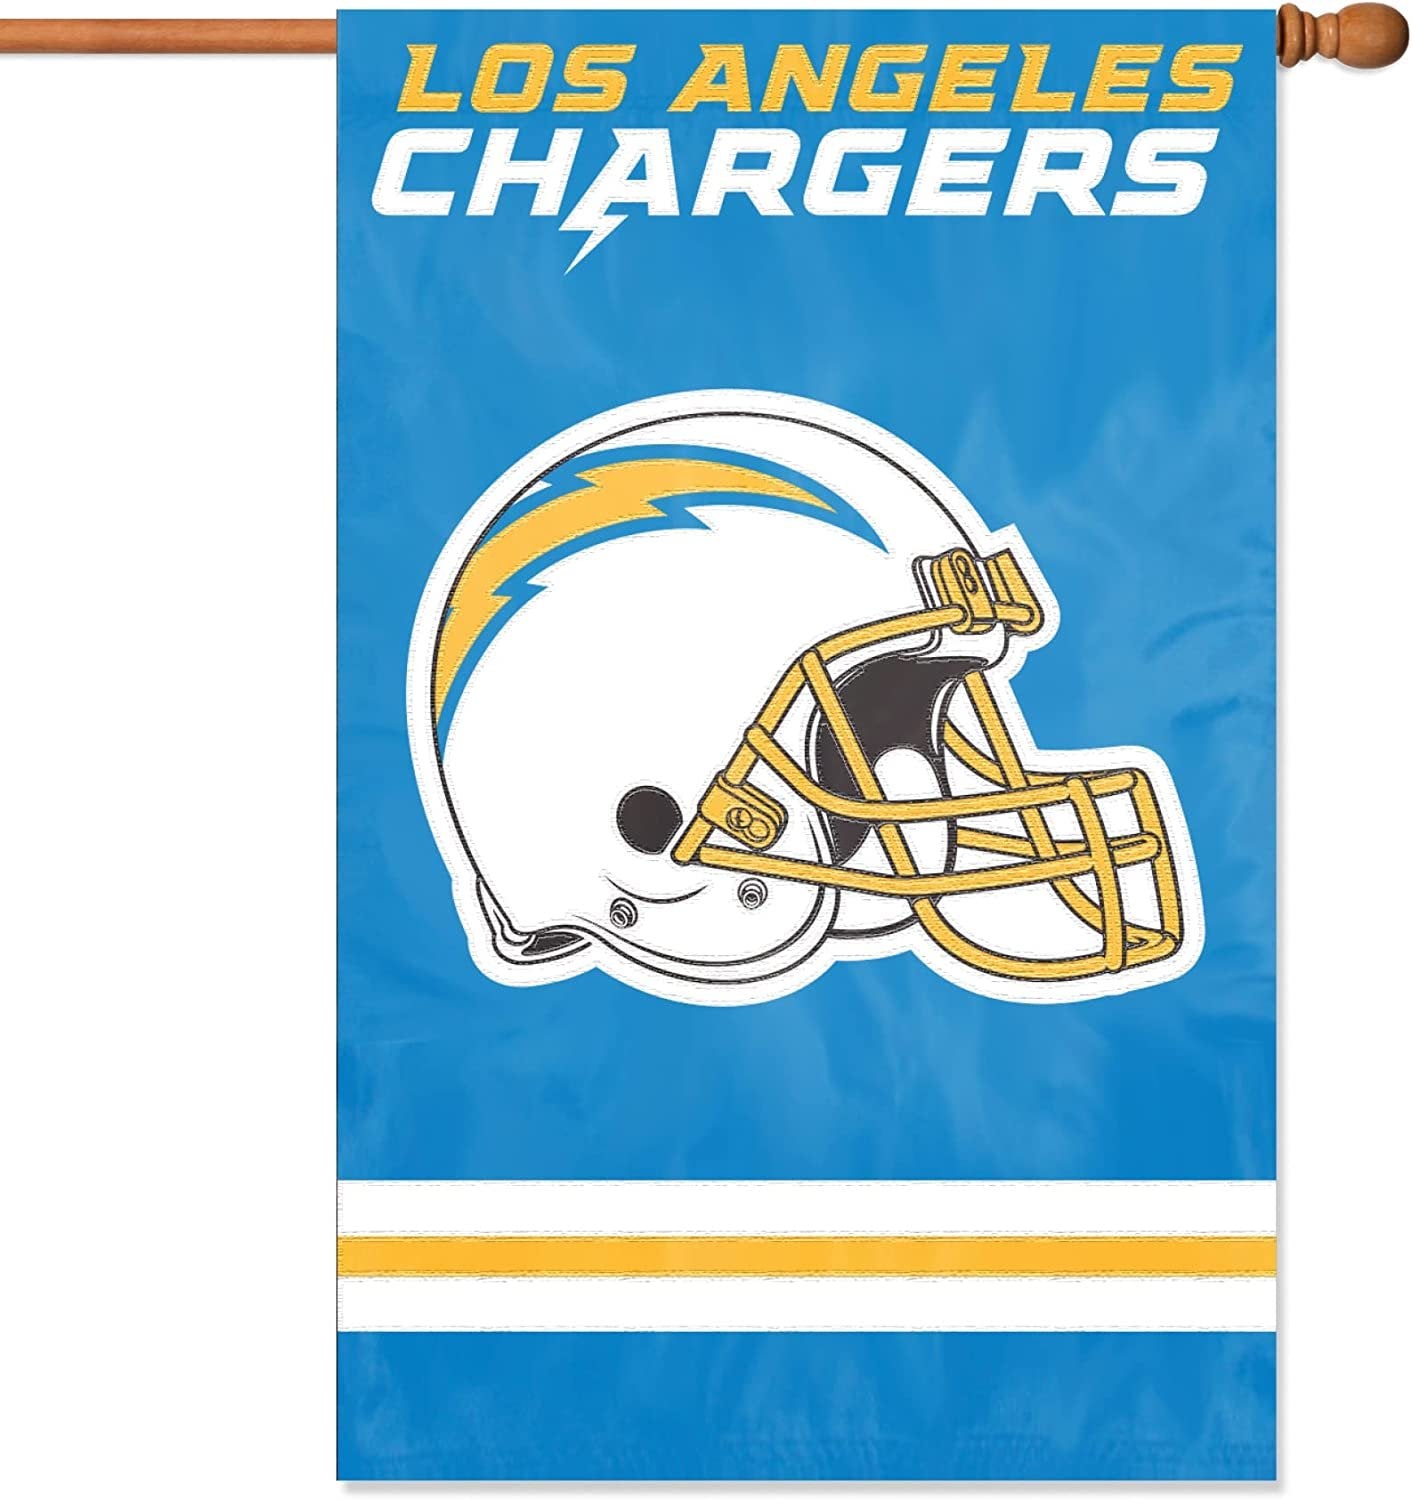 Los Angeles Chargers Premium Double Sided Banner Flag Applique Embroidered 28x44 Inches